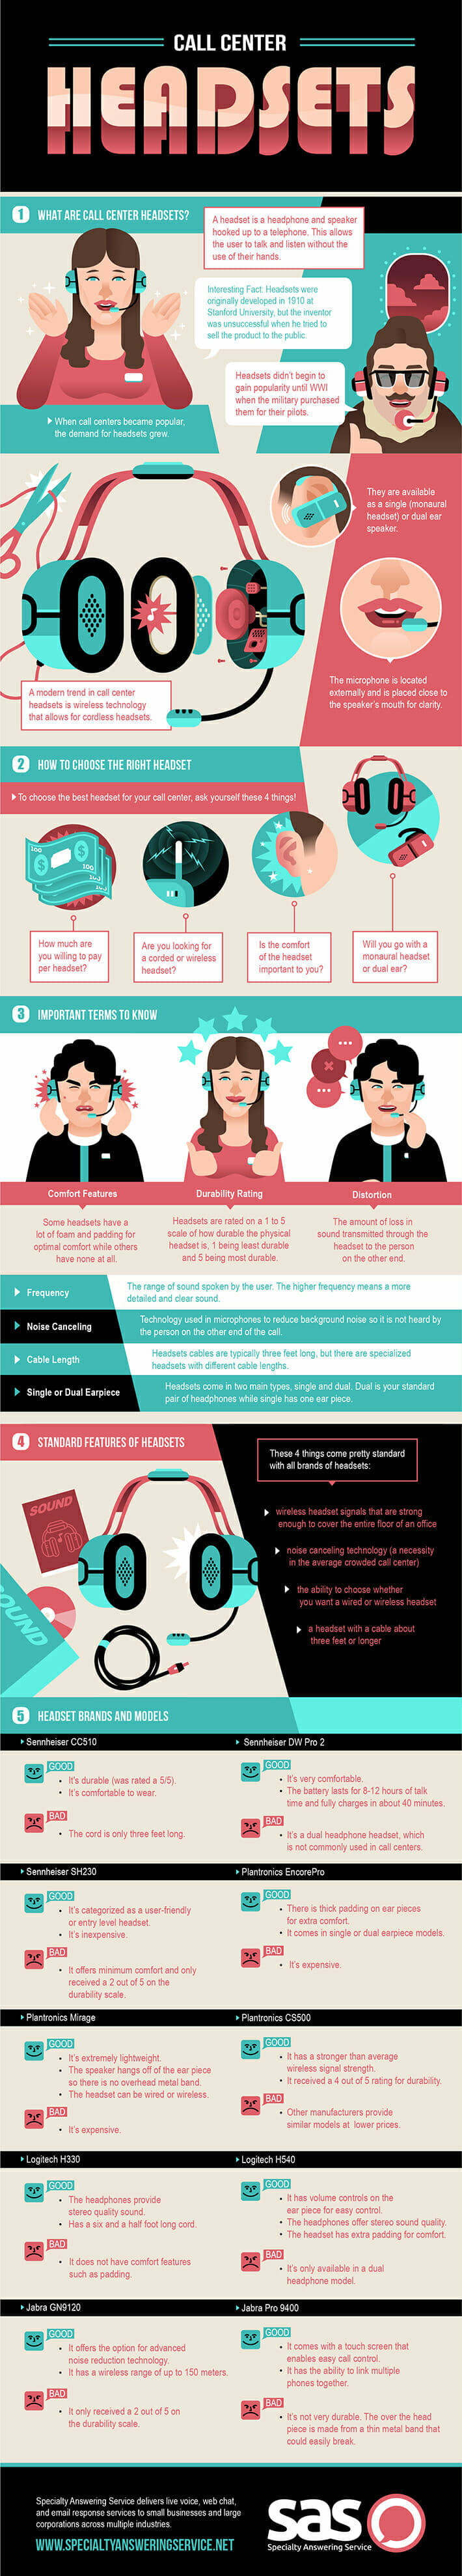 Call Center Headsets Infographic